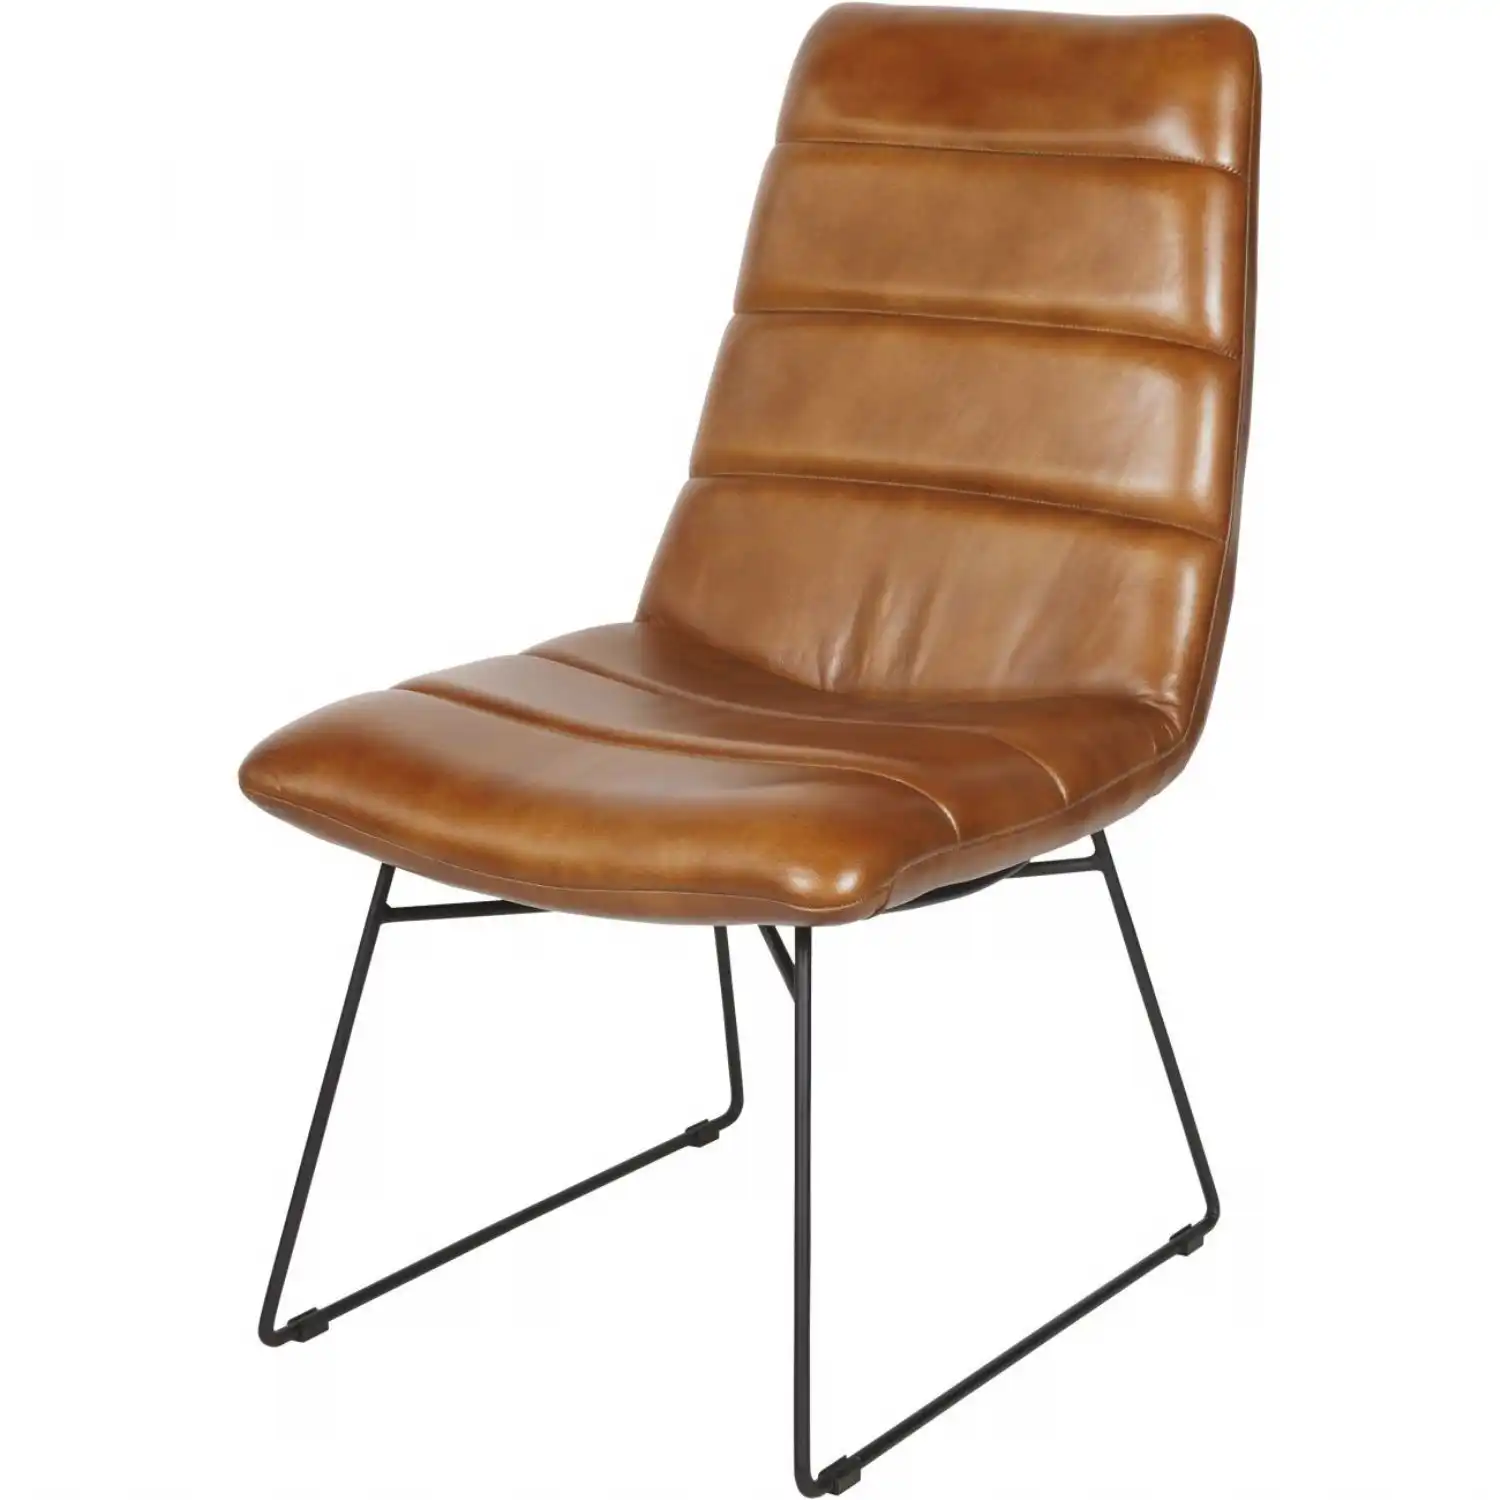 Leather Chair in Cognac